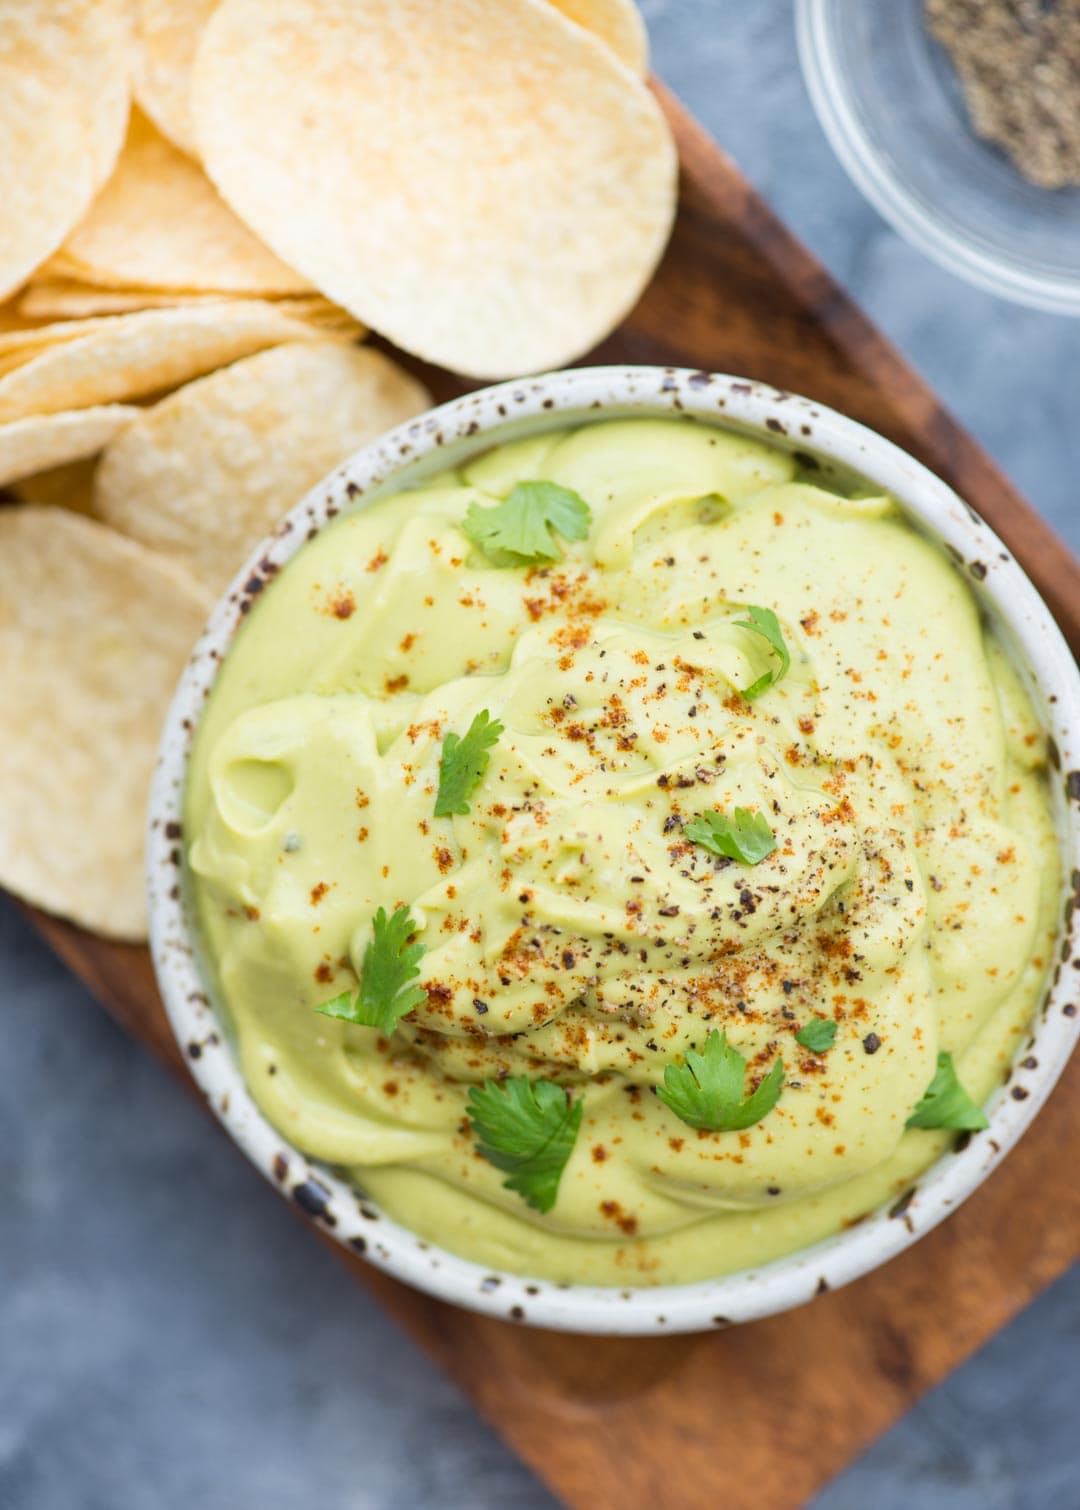 Creamy Avocado Dip shown in a small bowl, garnished with coriander leaves alongside potato chips